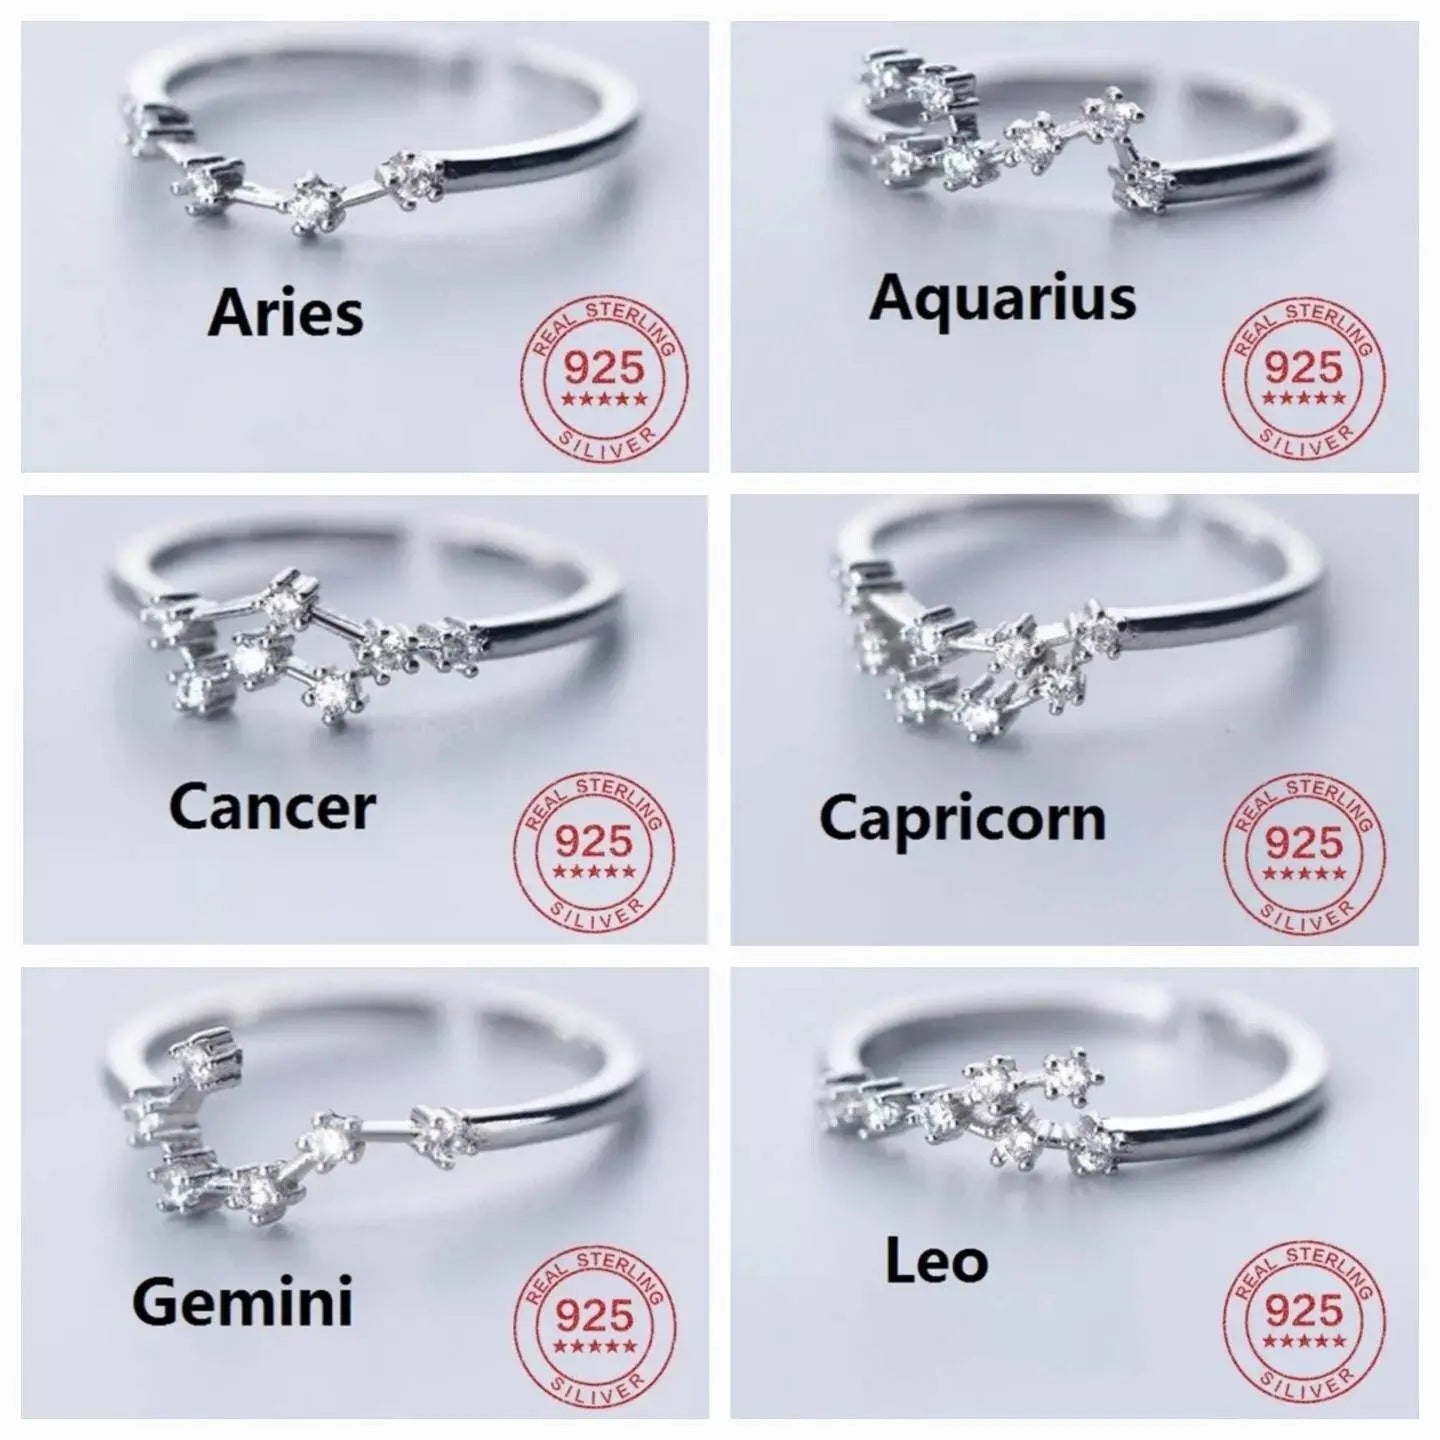 12 Constellation Ring Sterling Silver Cubic Zirconia Adjustable Open Ring CZ Zodiac Middle Finger Pinky Ring Size 4.25-8 - JettsJewelers